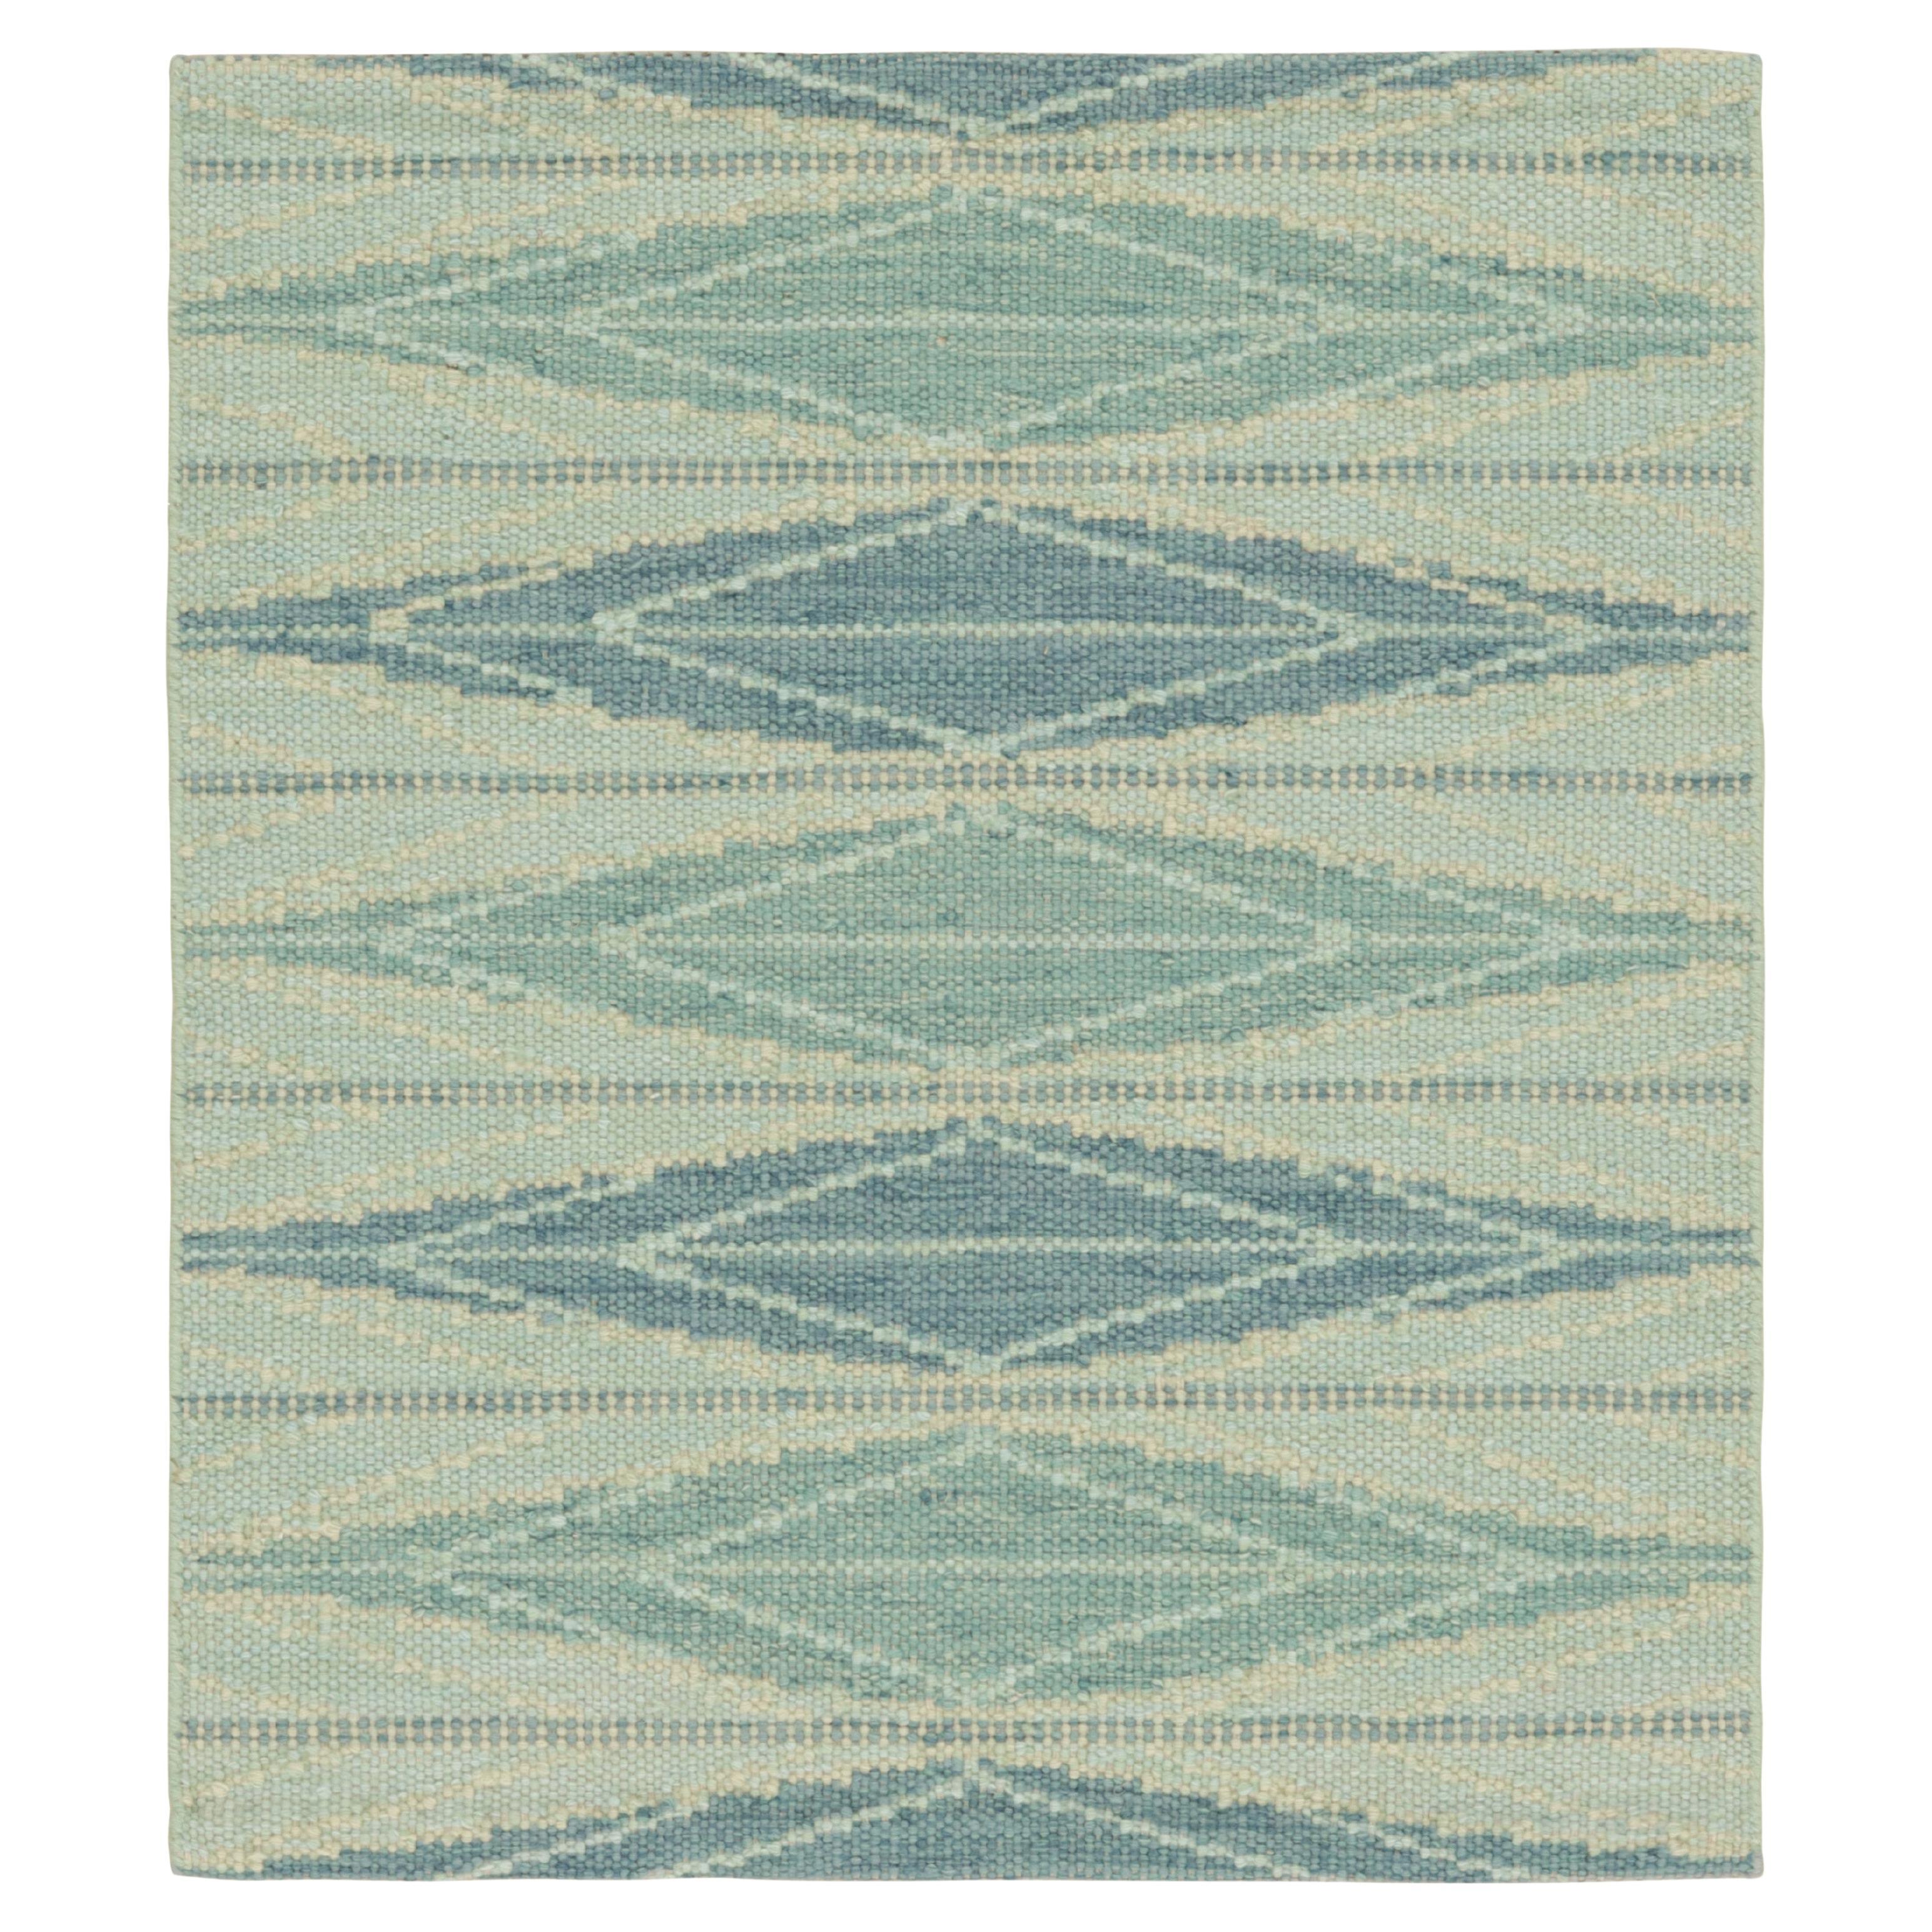 Rug & Kilim’s Scandinavian Style Square Rug in Blue, with Geometric Patterns